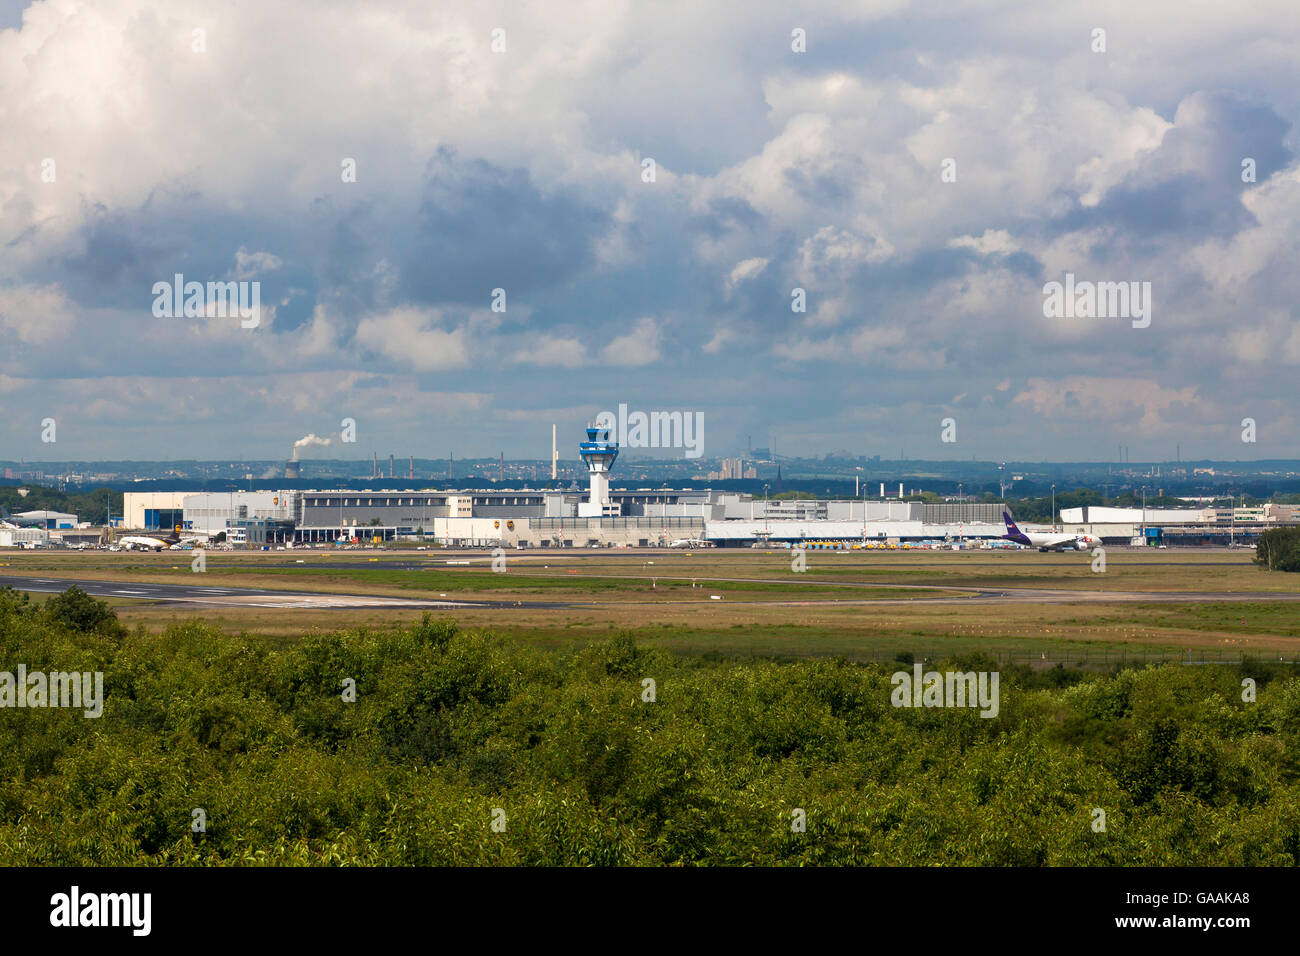 Germany, Troisdorf, North Rhine-Westphalia, clouds above the Aircargo-Hub of the airport Cologne Bonn. Stock Photo